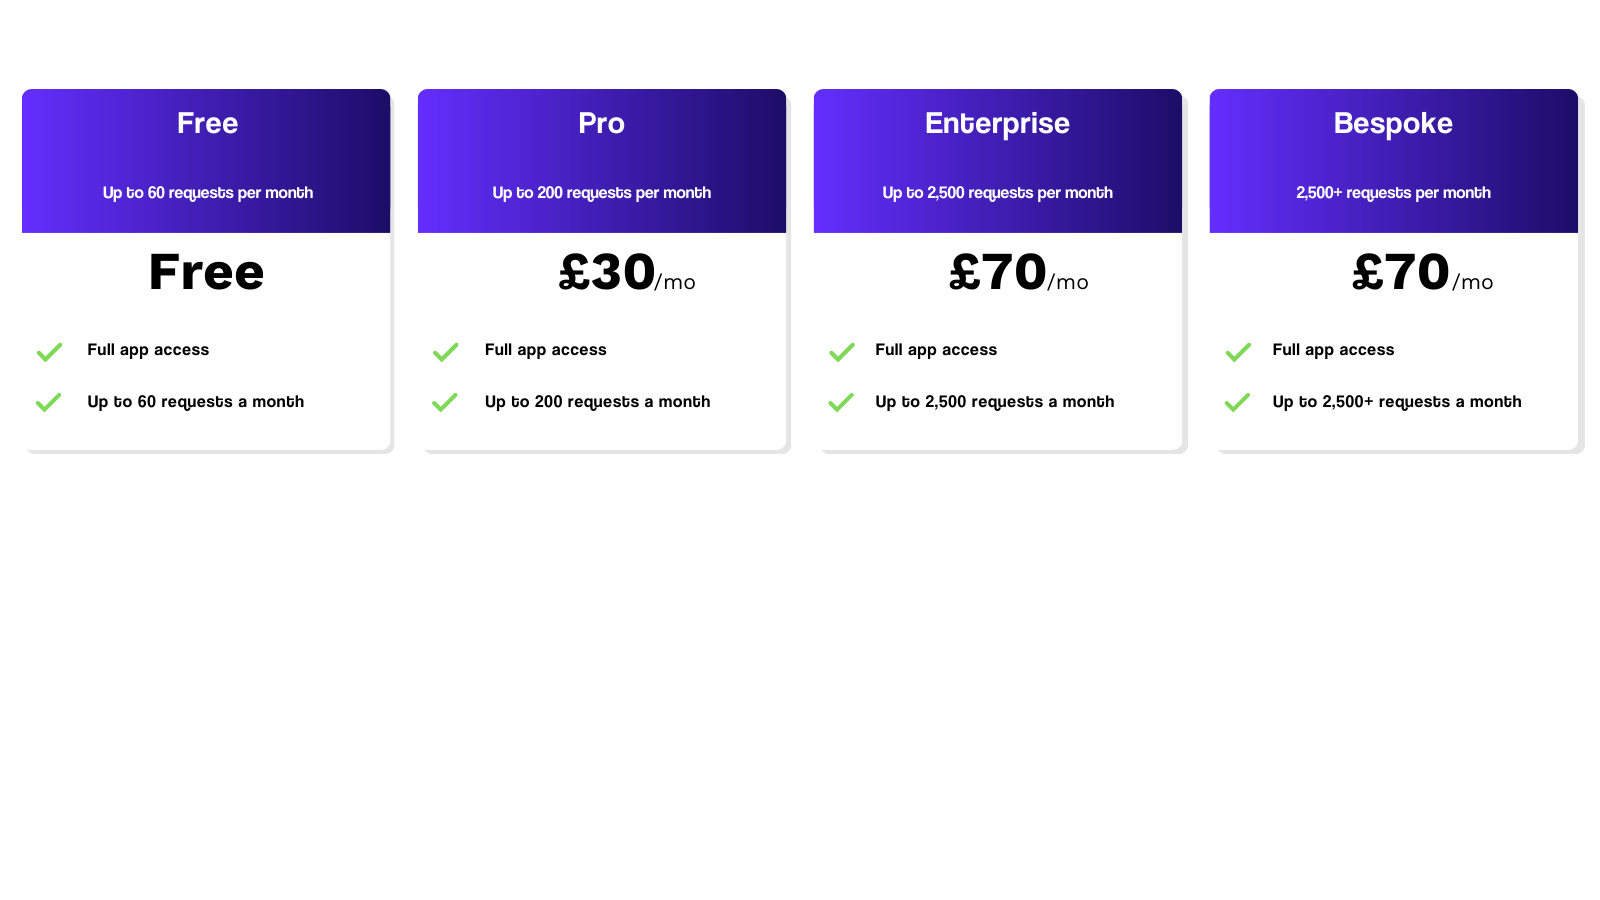 Pricing, Free 60 requests per month, pro £30 per month has 200 requests per month, enterprise £70 per month and has 2500 requests per month and bespoke at £70 has over 2500+ per month